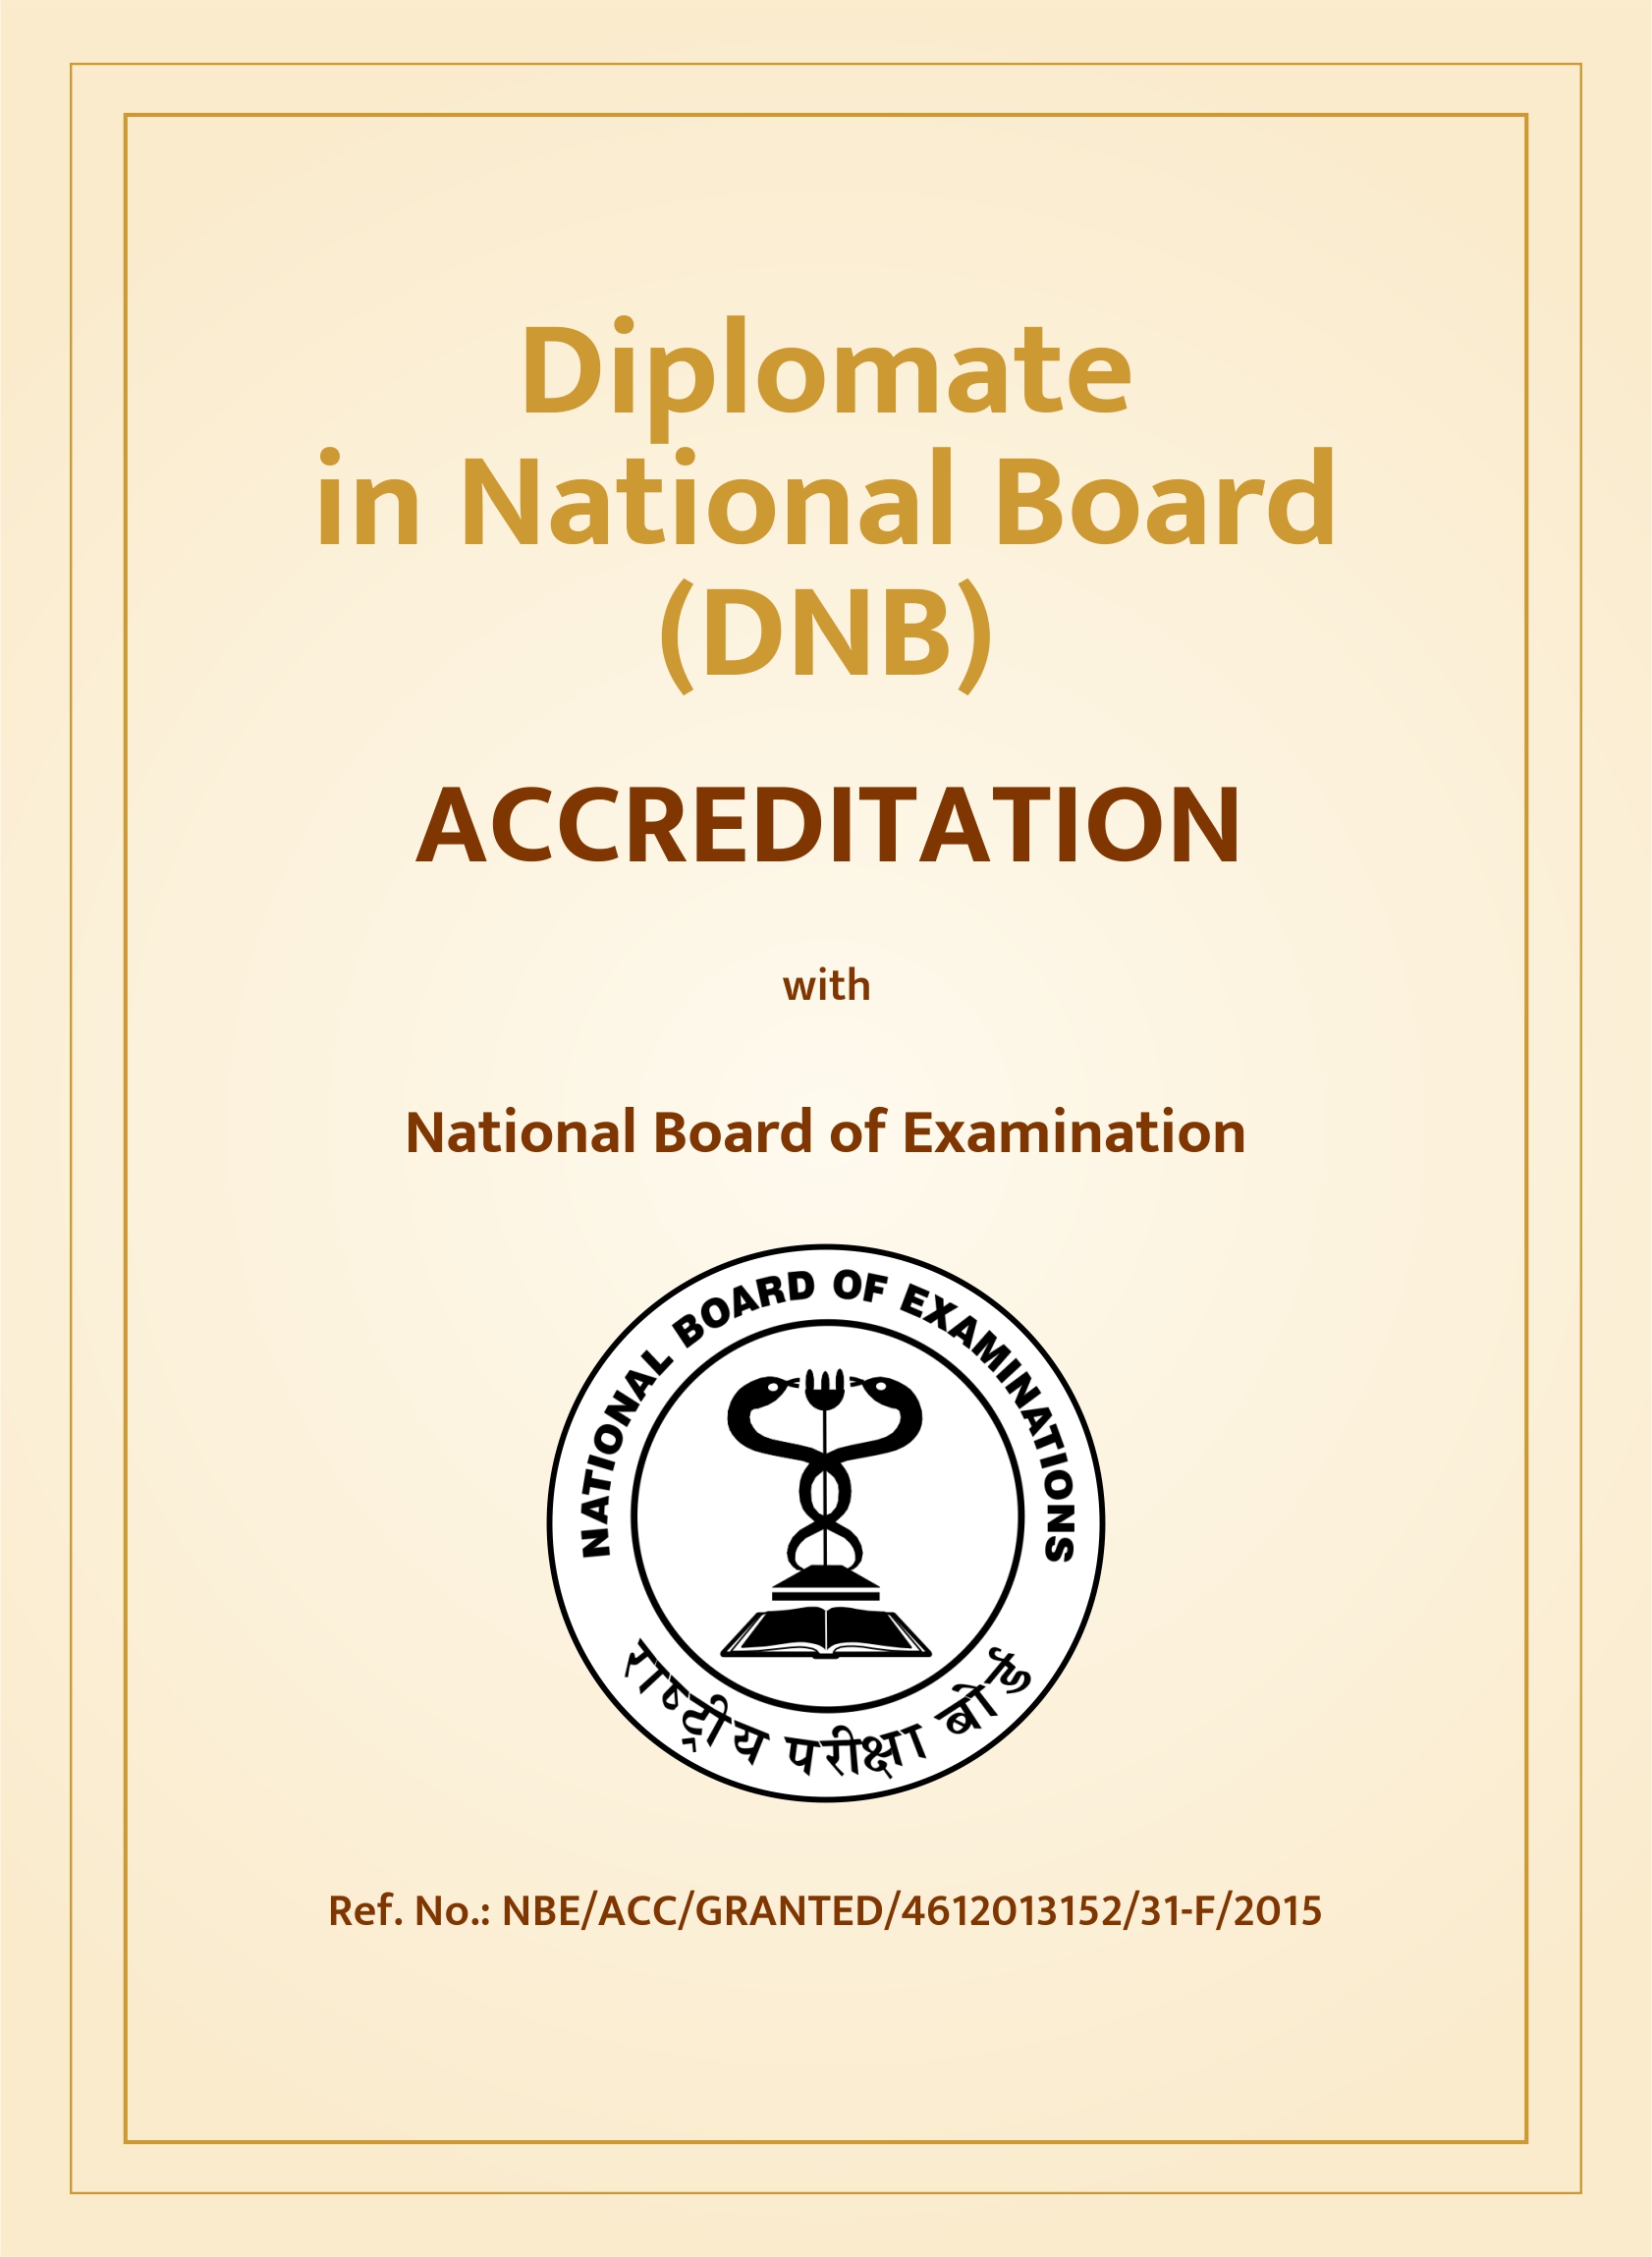 Diplomate of National Board (DNB)